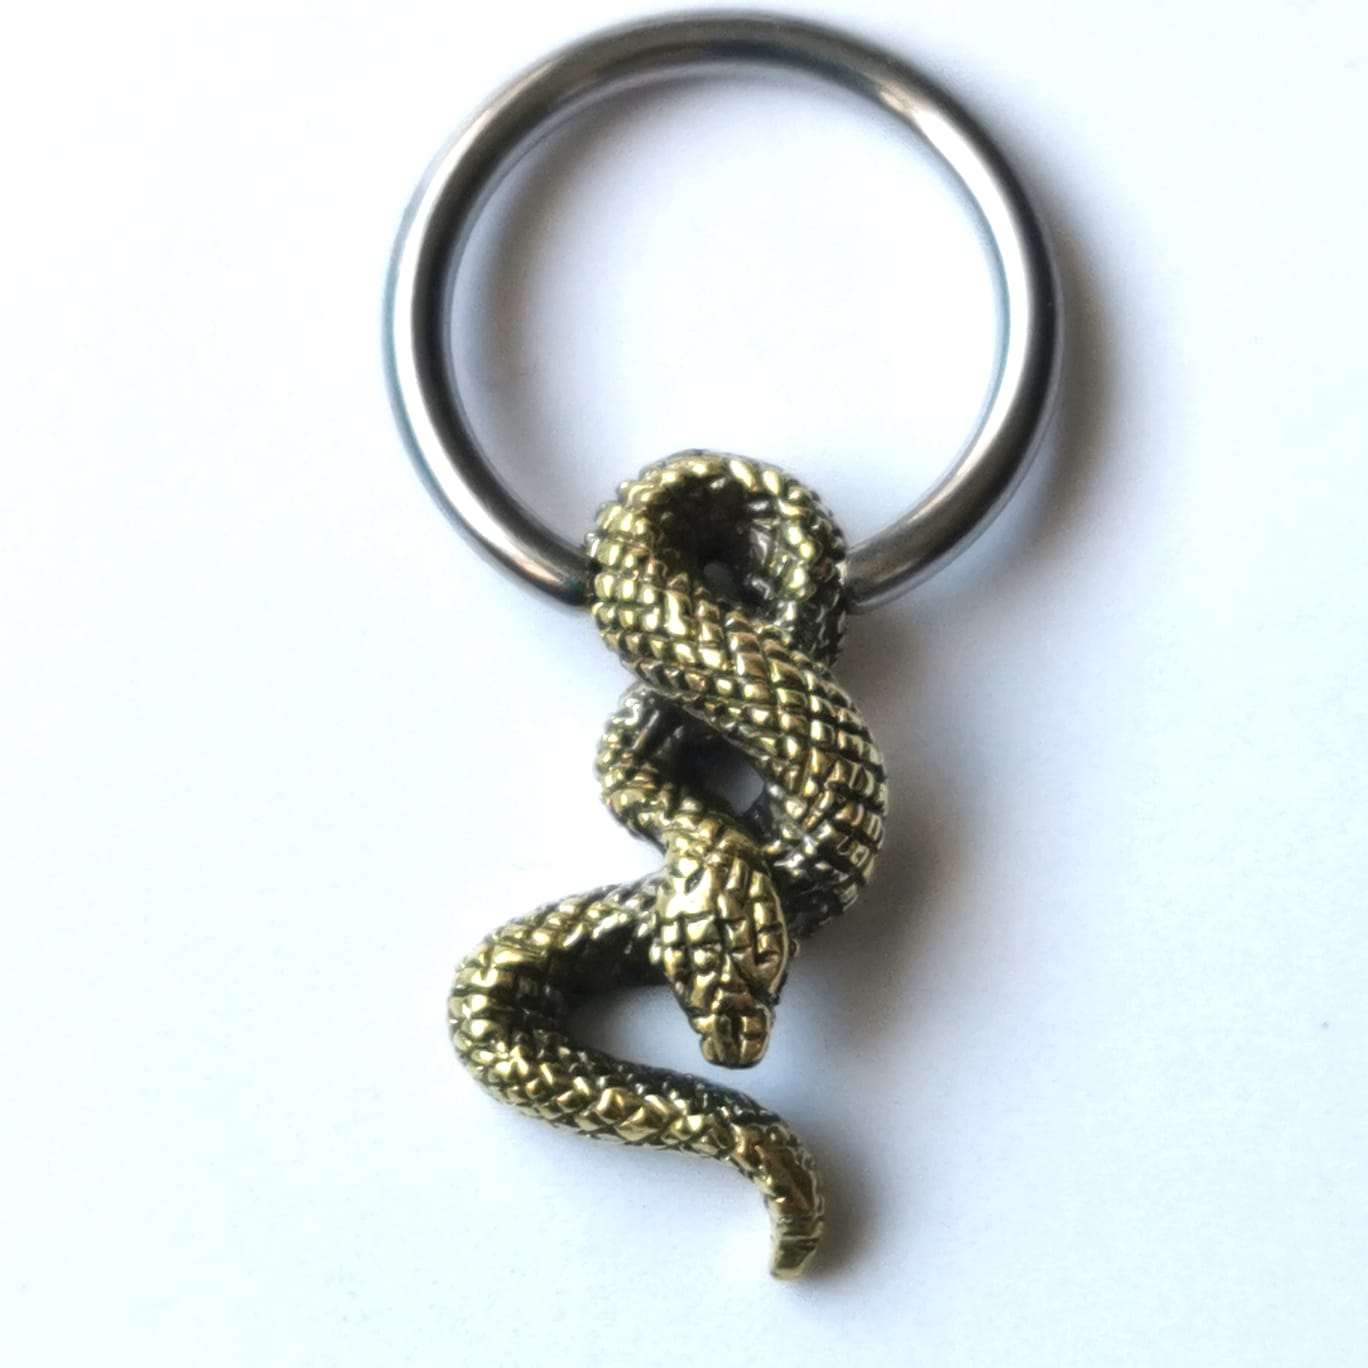 Stainless Steel and Brass Snake Body Ring Nipple Ring